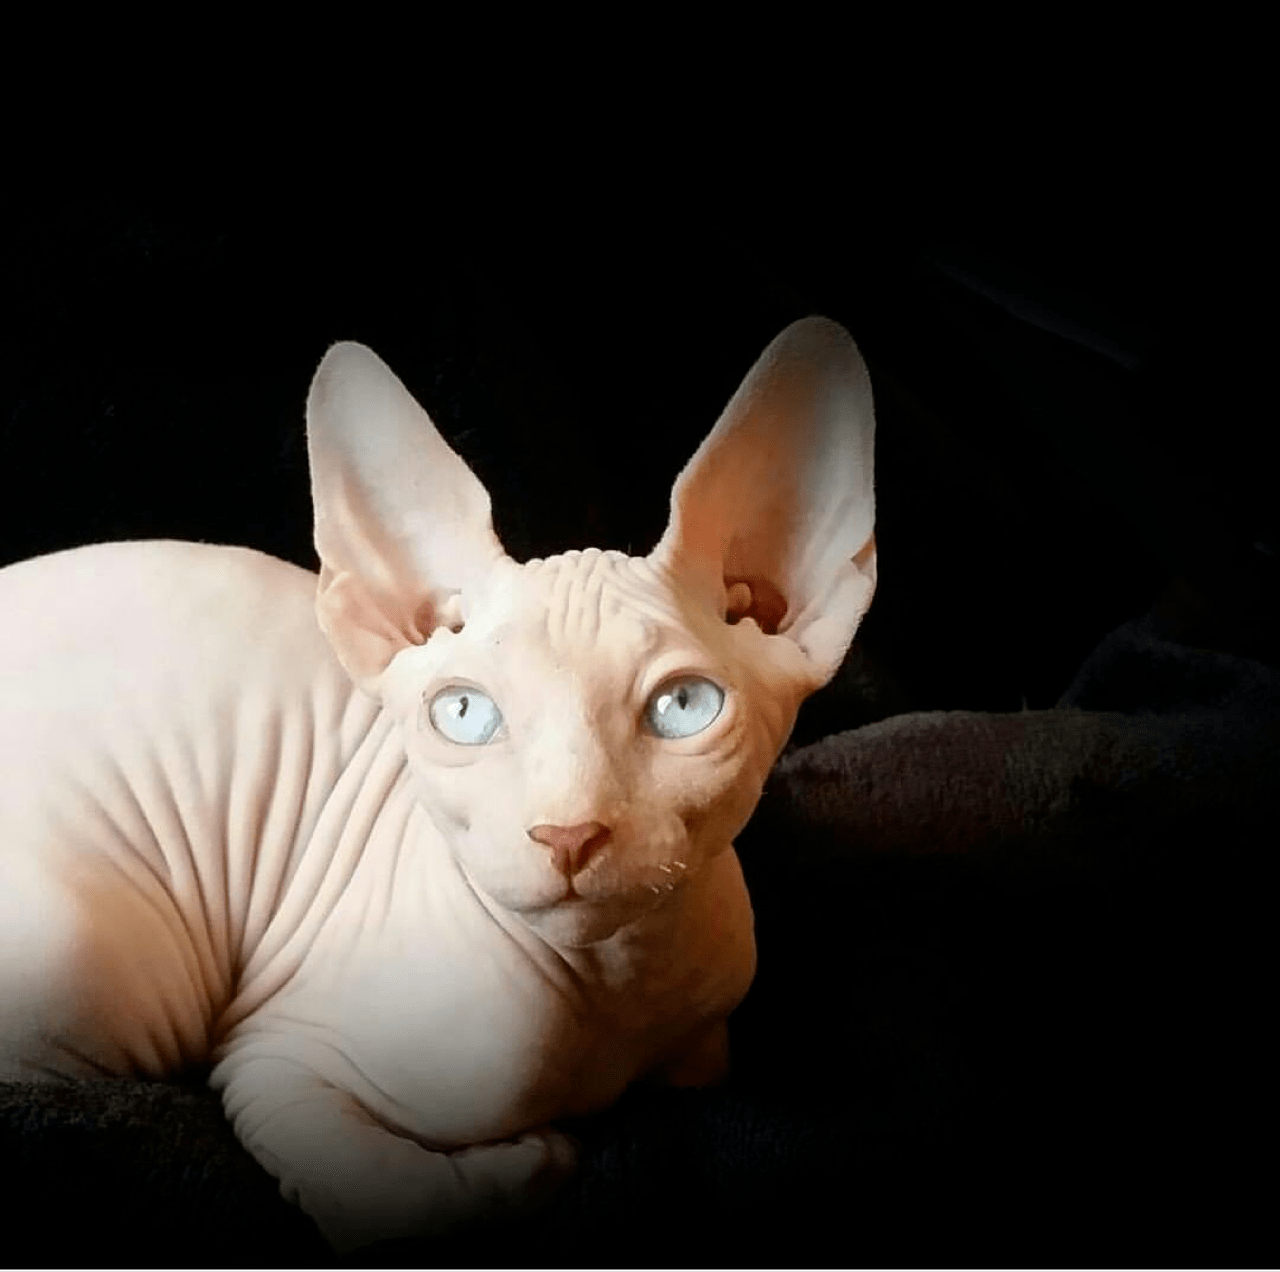 Sphynx Cats: Beauty Without Fur